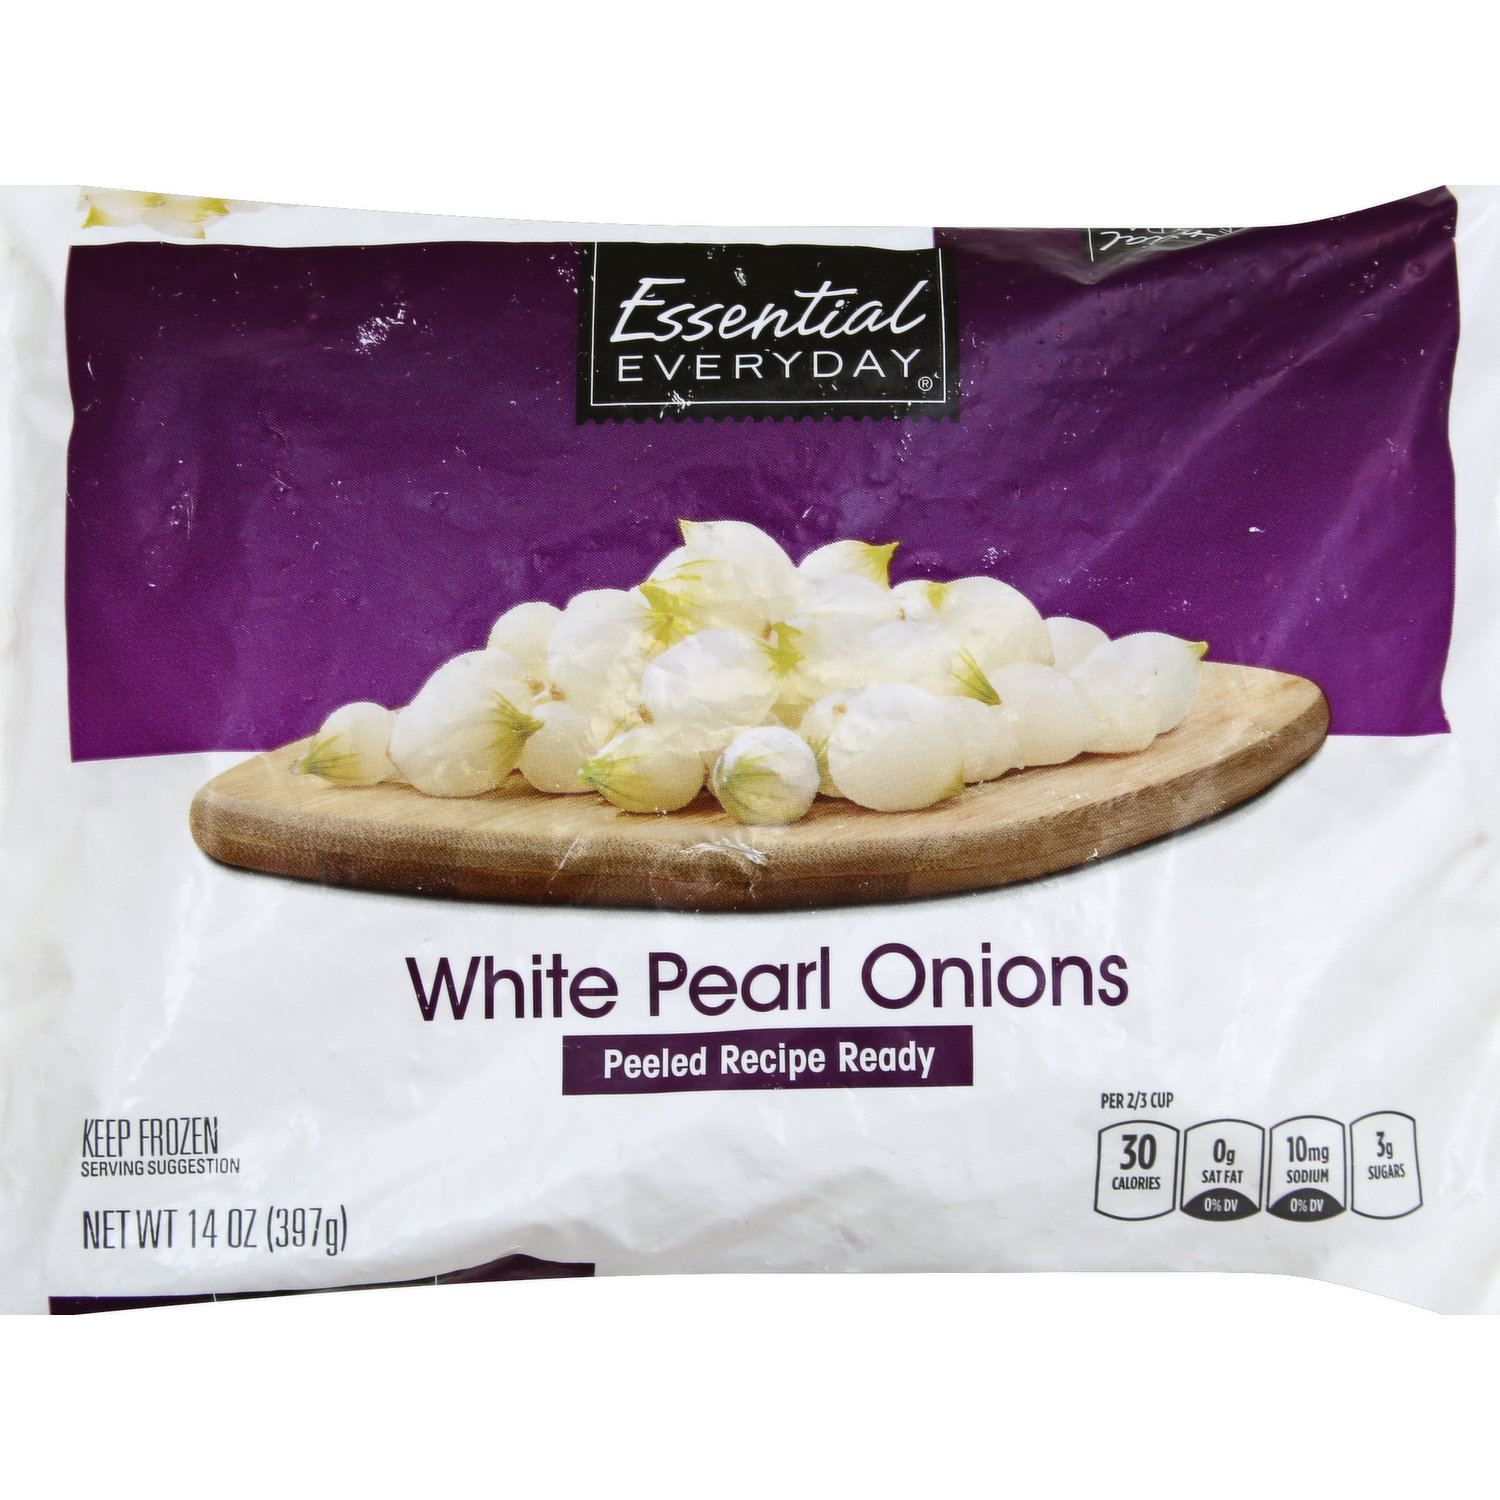 Frozen Pearl Onions Are Just As Good Fresh, Without The Hassle Of Peeling